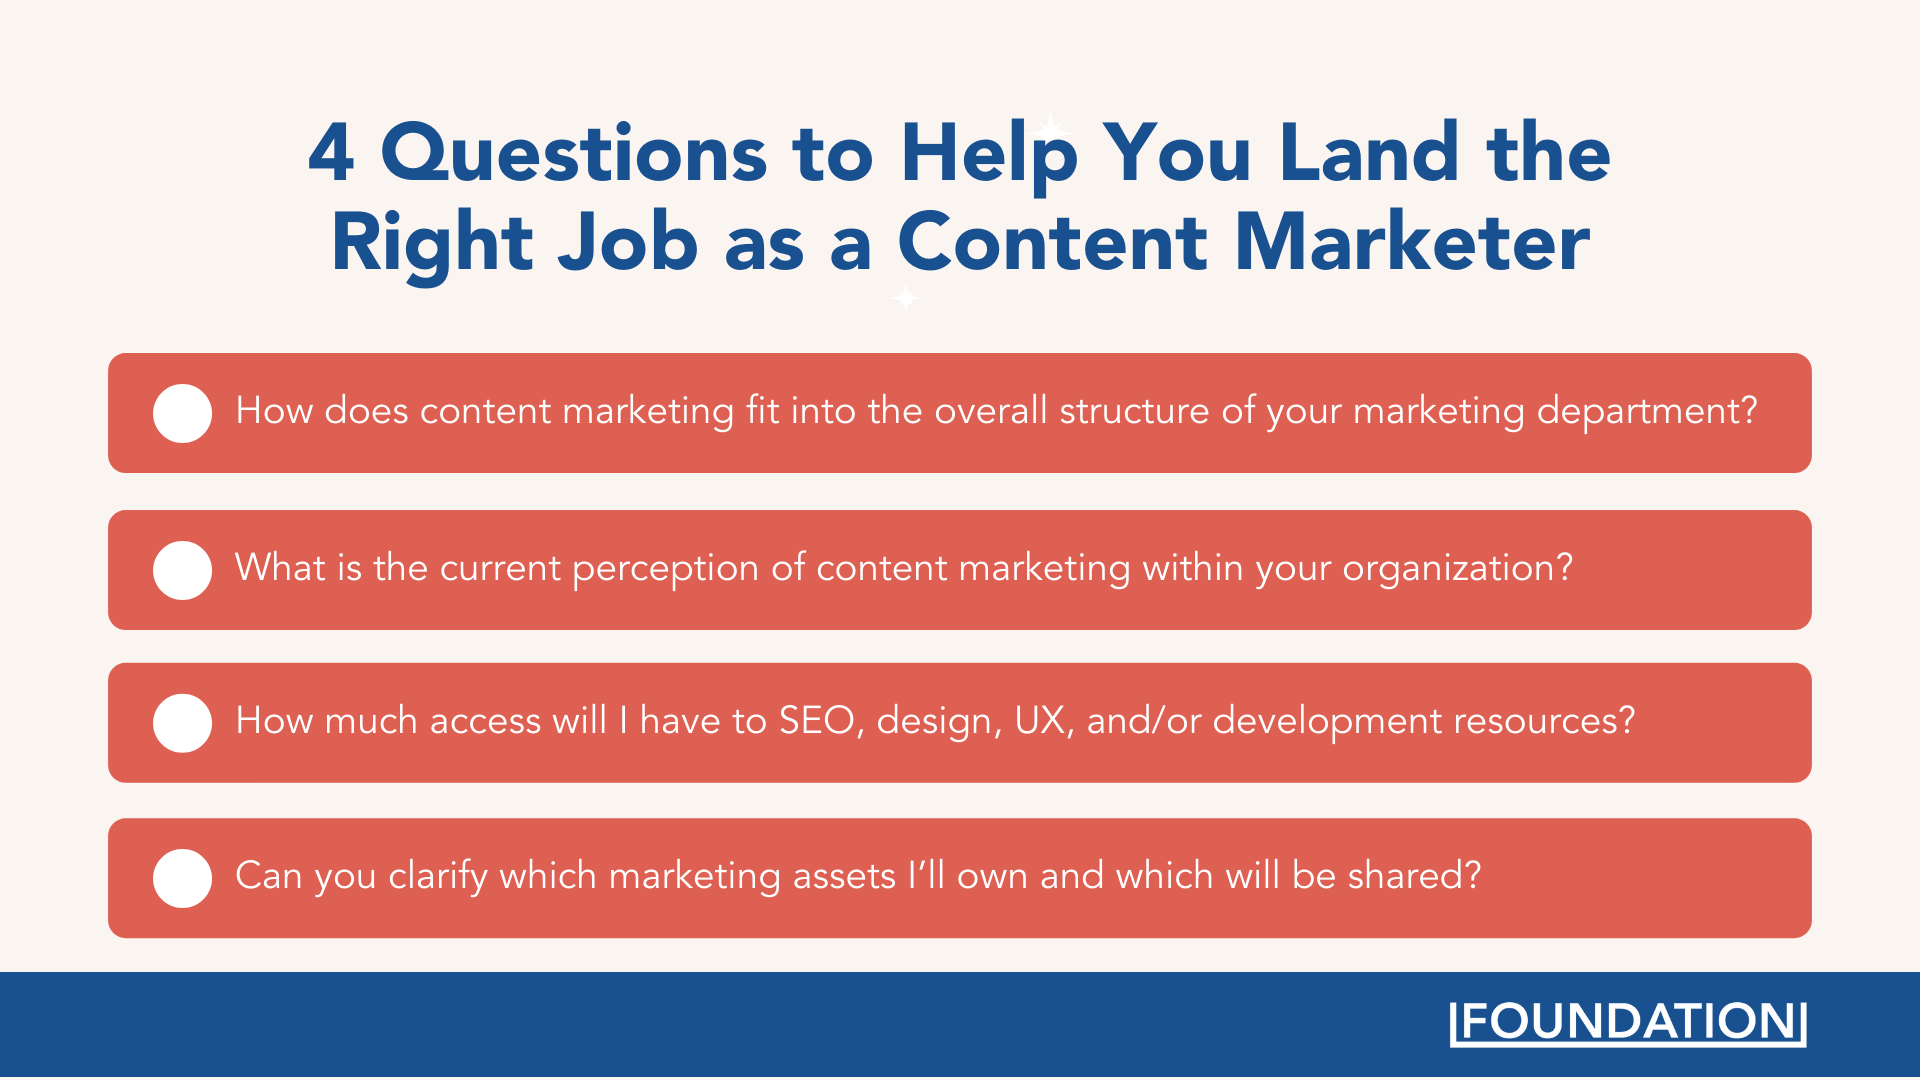 4 questions to help you land the right job as a content marketer